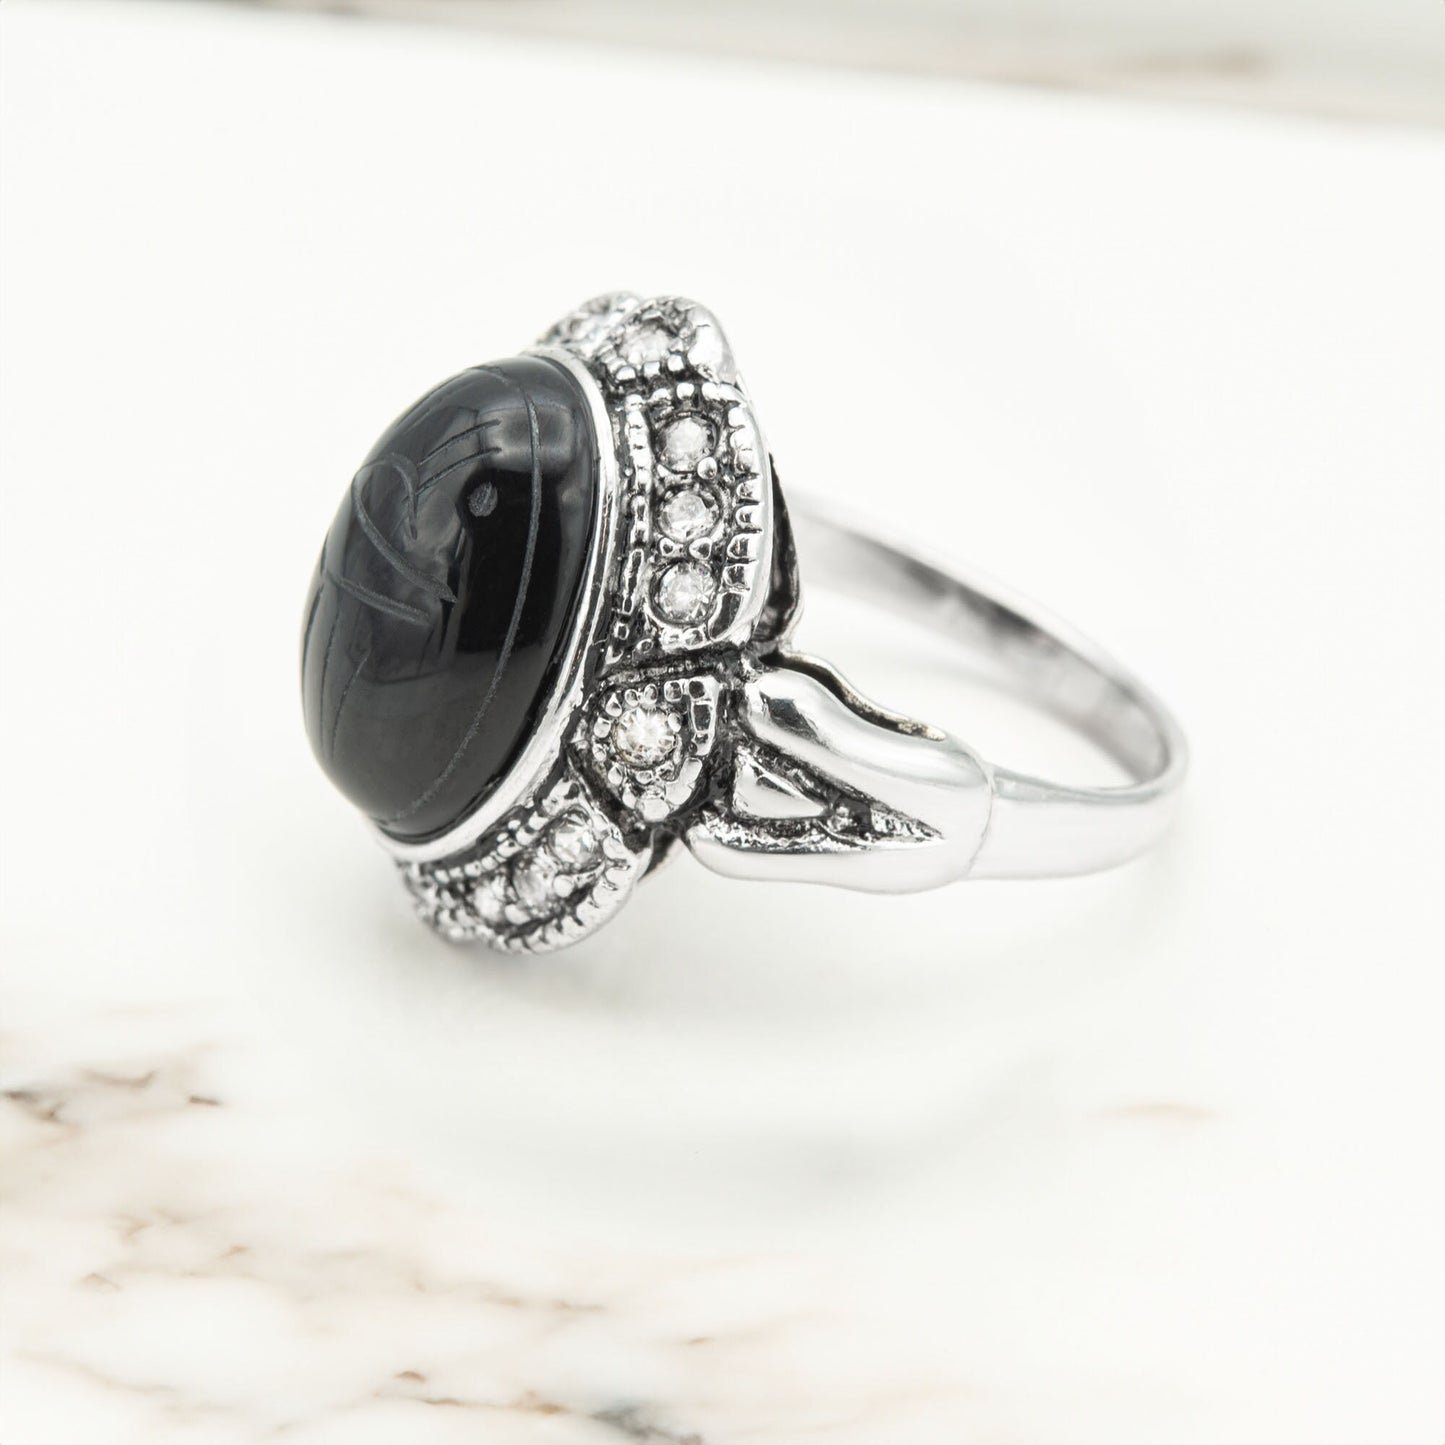 Genuine Black Onyx Scarab or Moonstone Ring Vintage 1970s 18k White Gold Antique Plated Clear Austrian Crystals Woman's Handmade Jewelry #R1730-BSCY